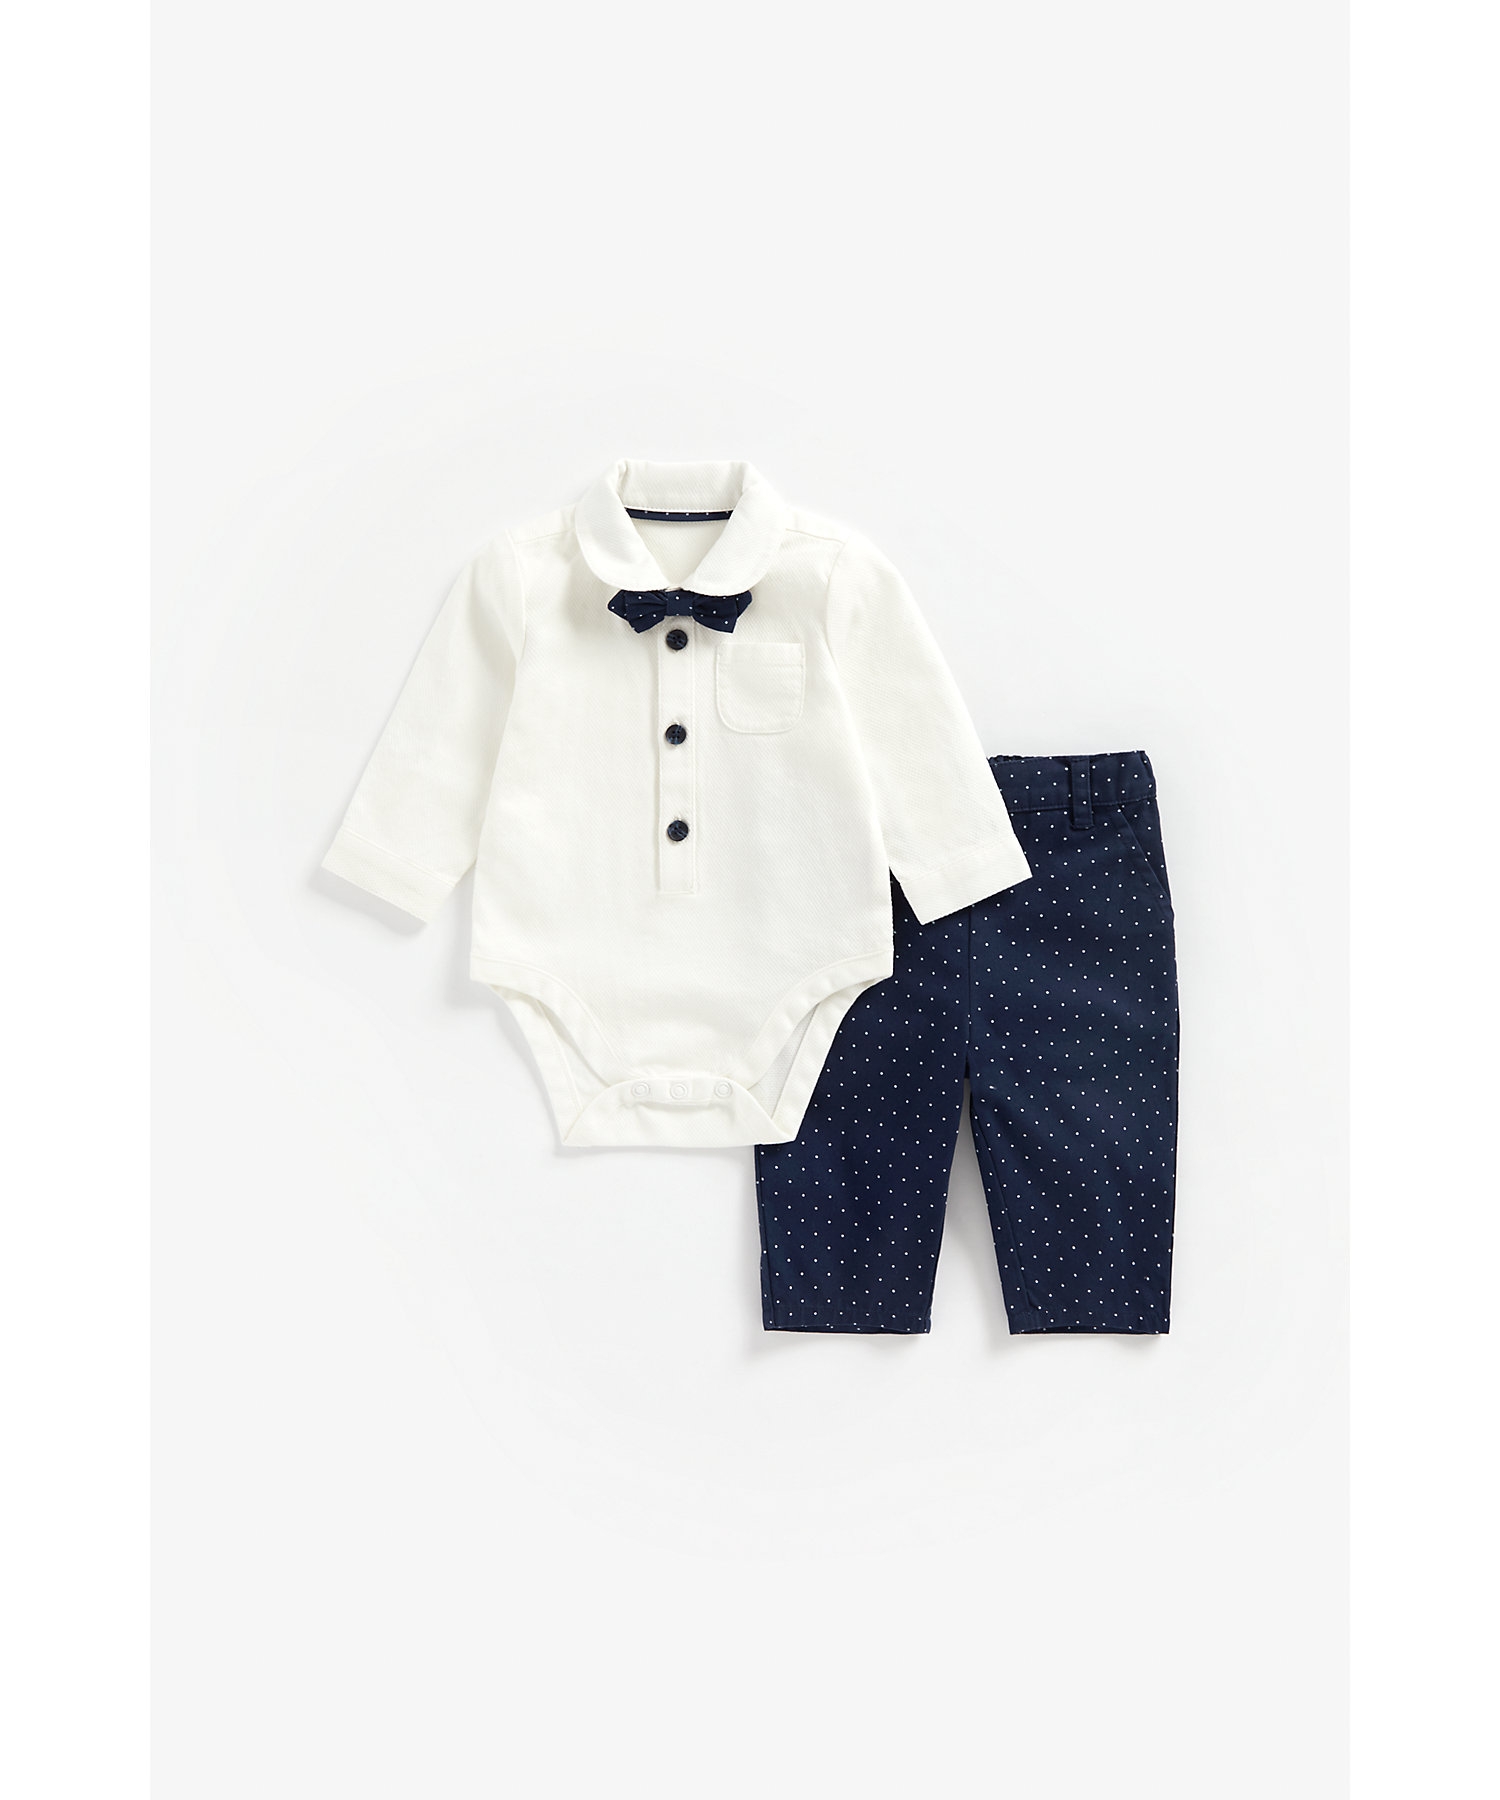 Boys Full Sleeves Bodysuit, Bow Tie And Trousers Party Set - Navy